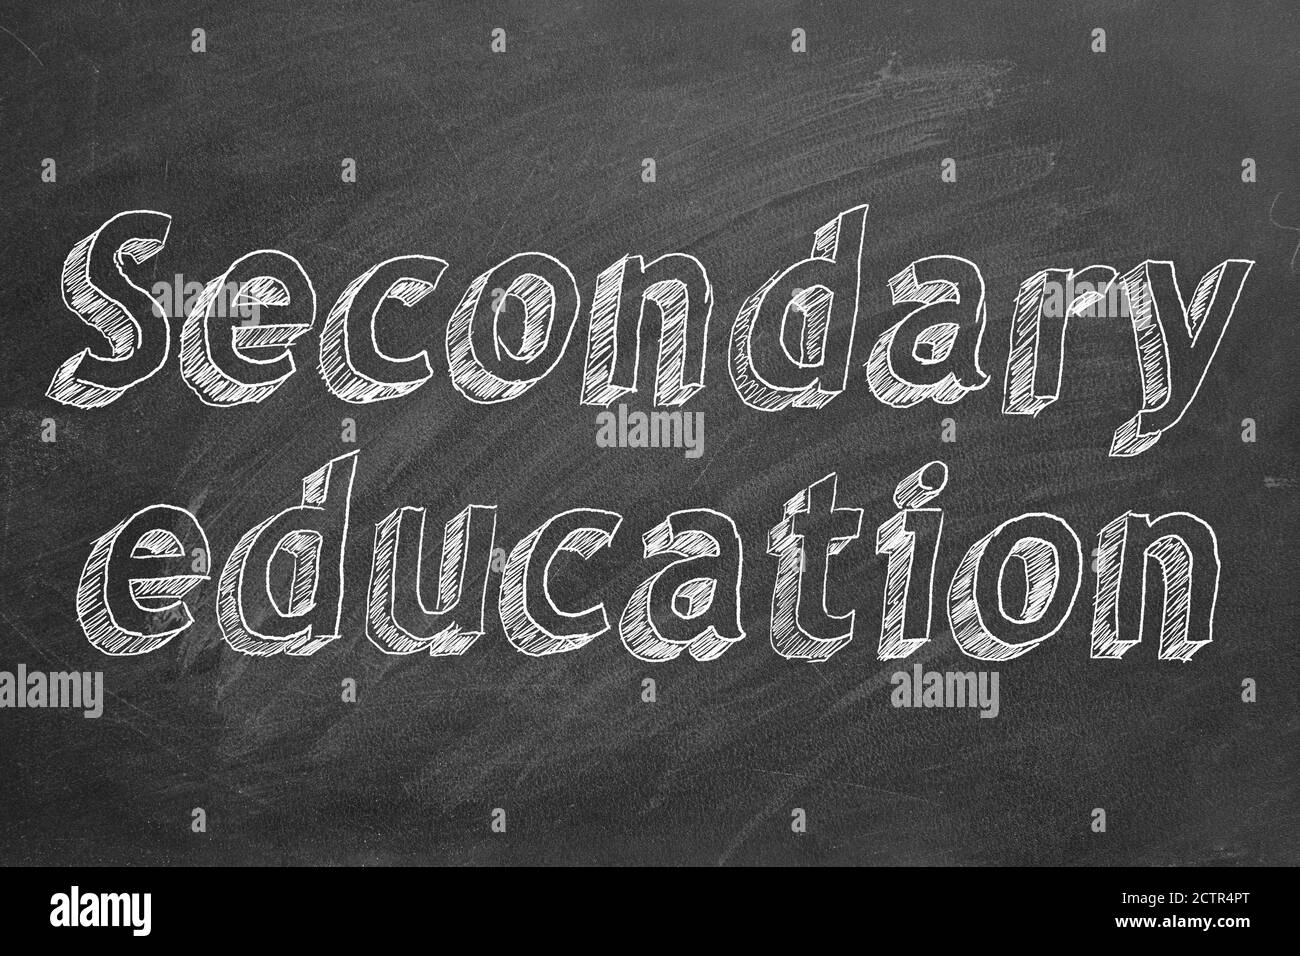 Hand drawing 'Secondary education' on black chalkboard Stock Photo